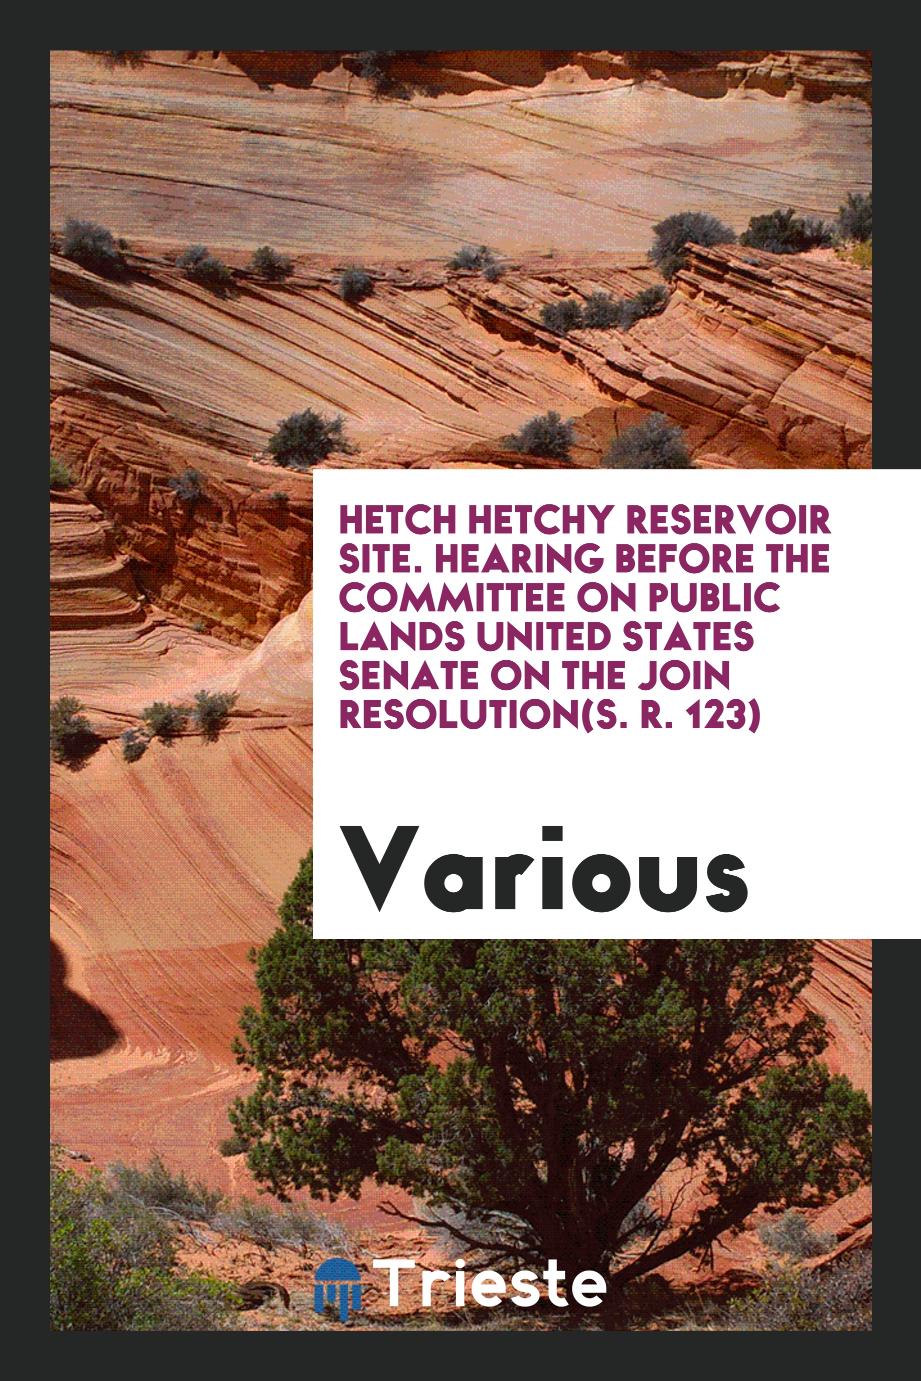 Hetch Hetchy Reservoir Site. Hearing Before the Committee on Public Lands United States Senate on the Join Resolution(S. R. 123)